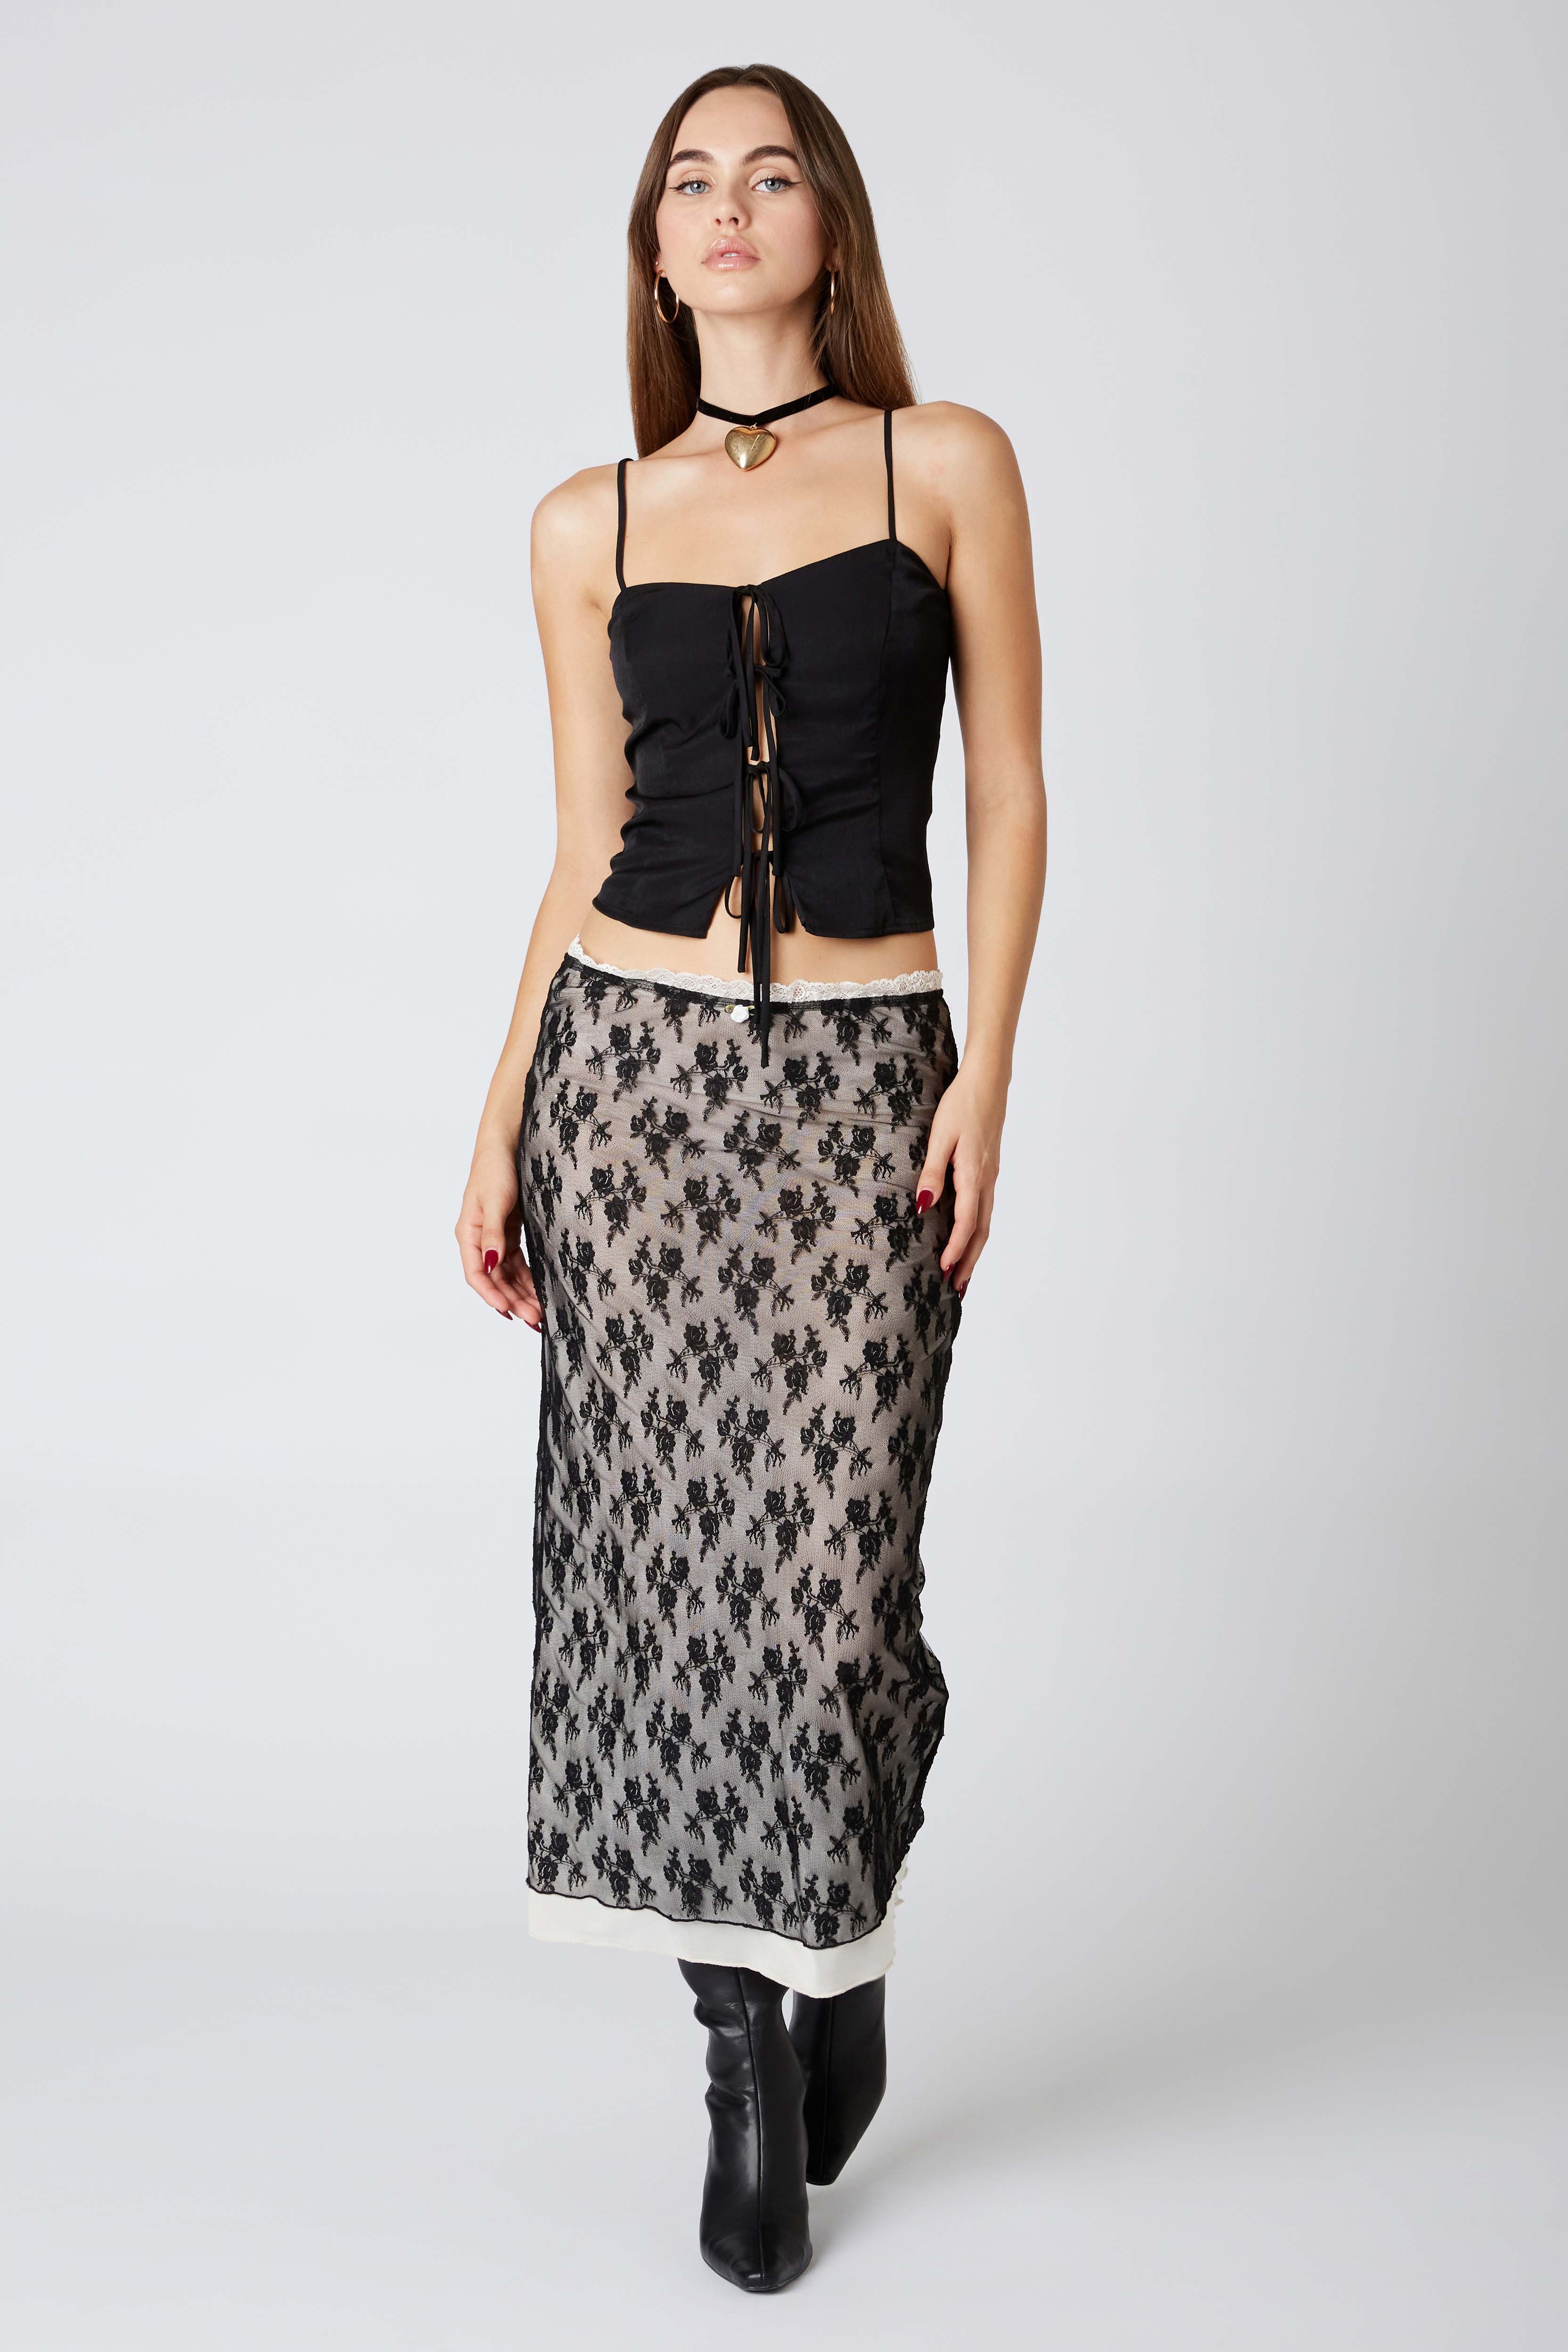 Lace Overlay Midi Skirt in Black Front View